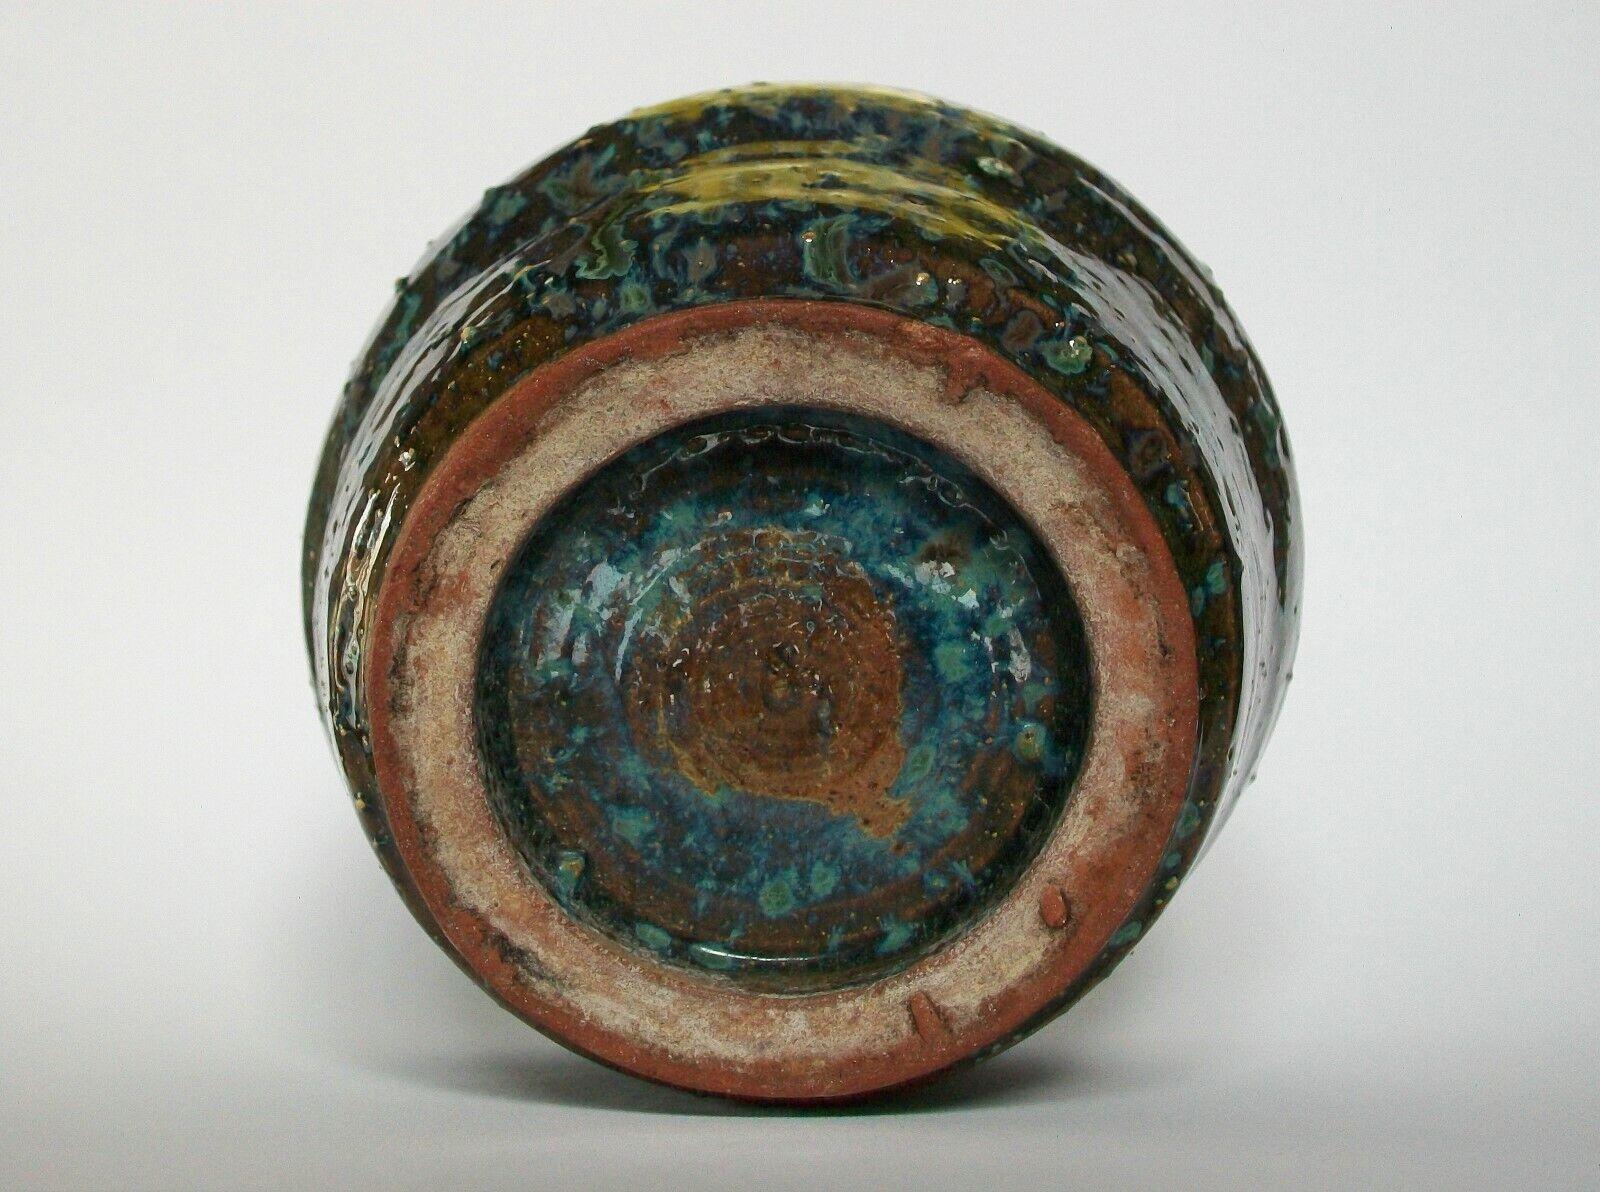 Art Nouveau Studio Pottery Vase, Terracotta with Splash Glaze, 20th Century In Good Condition For Sale In Chatham, ON